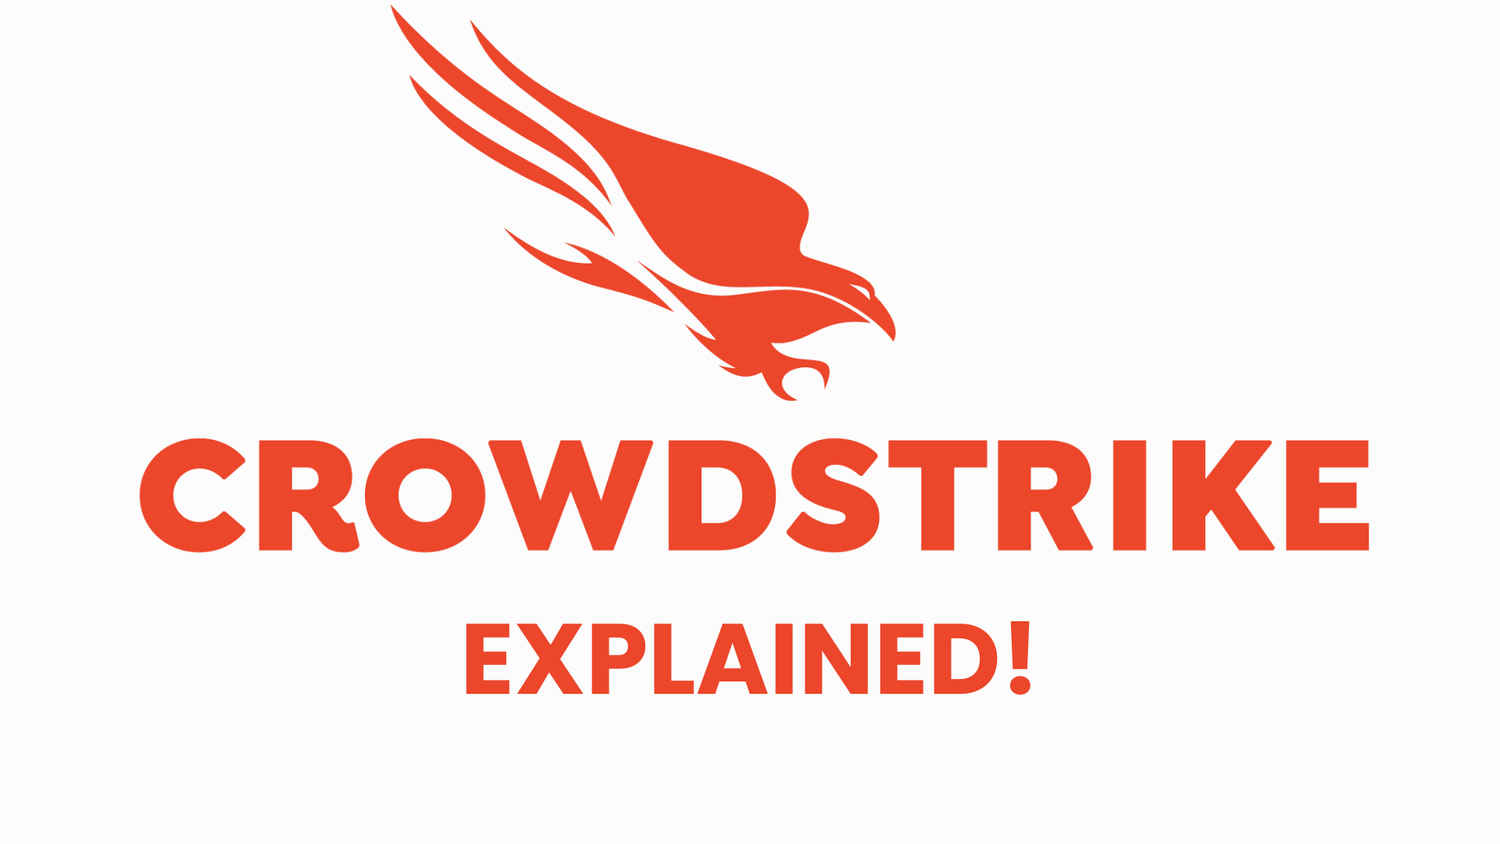 What is Crowdstrike: The company leading to Blue Screen of Death errors across world